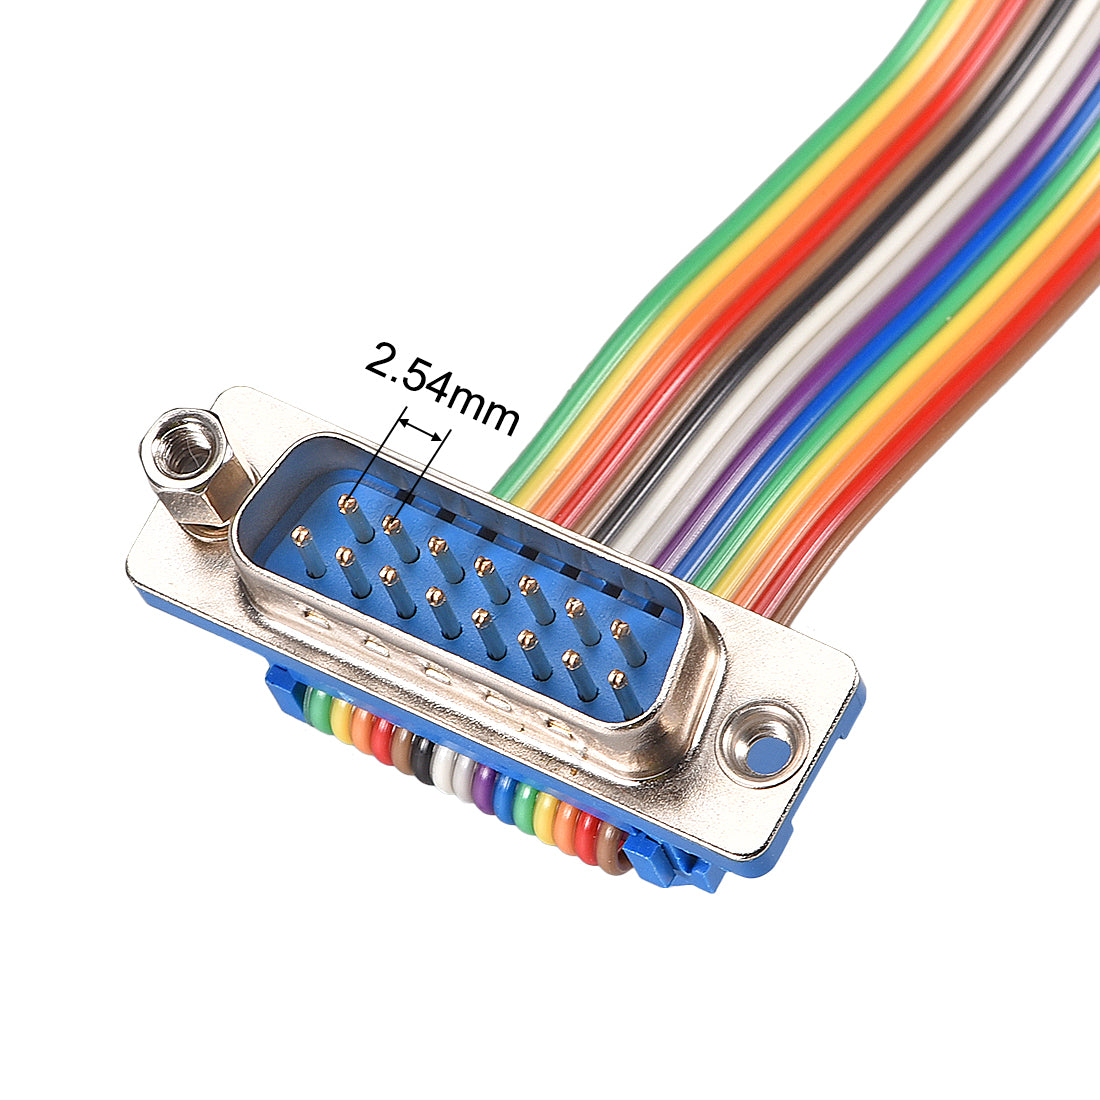 uxcell Uxcell IDC Rainbow Wire Flat Ribbon Cable DB15 Male to DB15 Female Connector 2.54mm Pitch 11.8inch Length